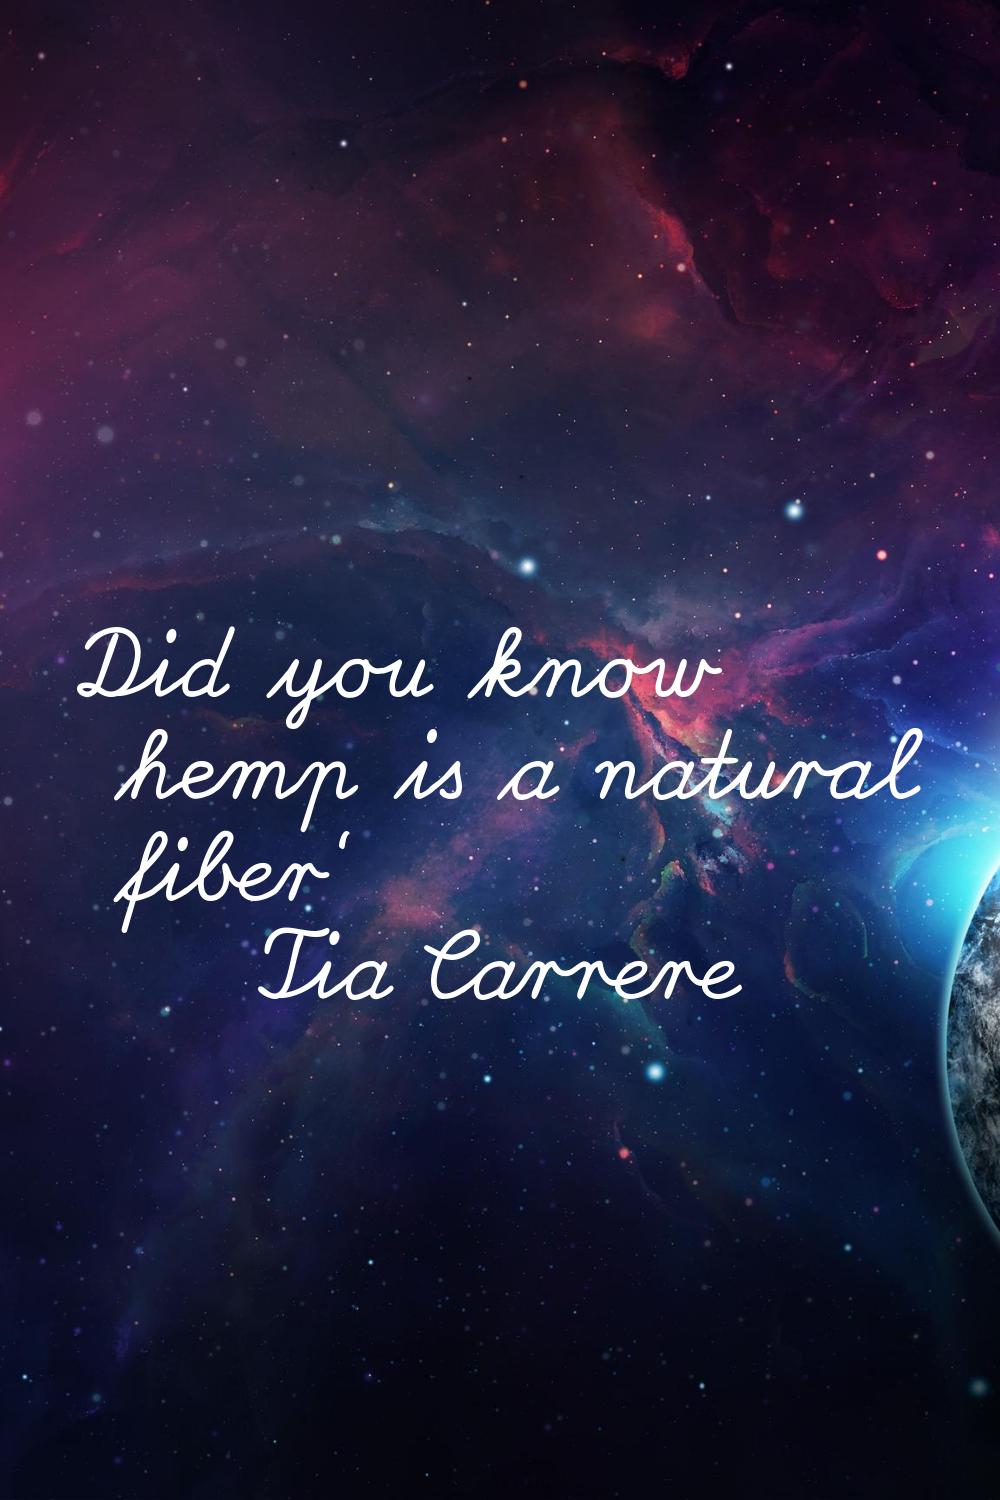 Did you know hemp is a natural fiber'